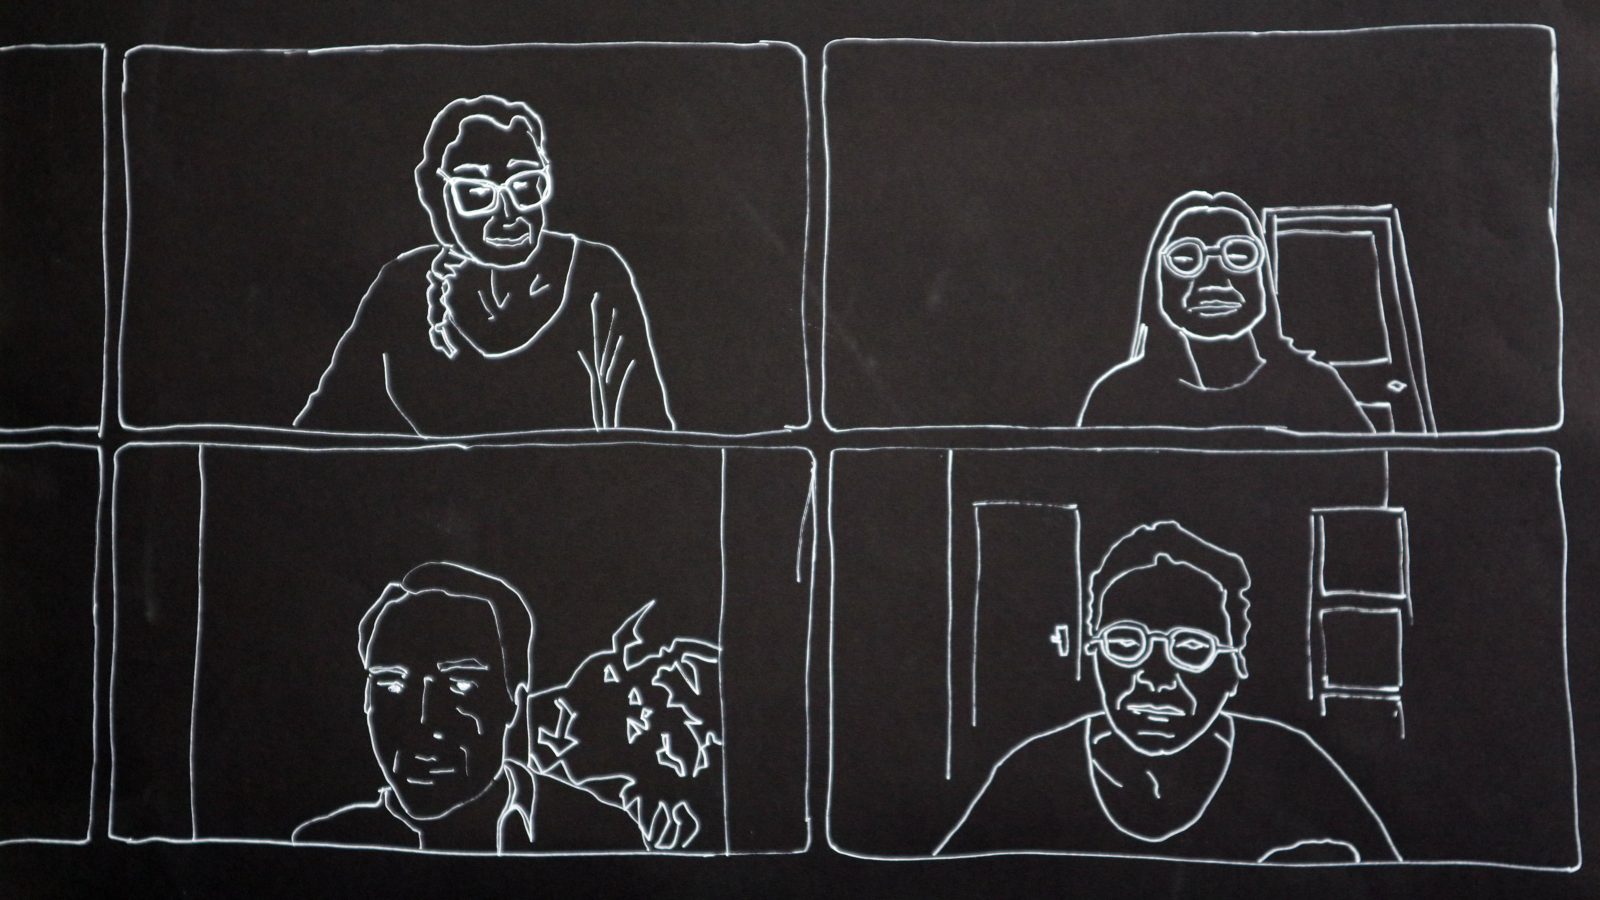 4 white line drawings on a black background of people's head and shoulder in a rectangle.